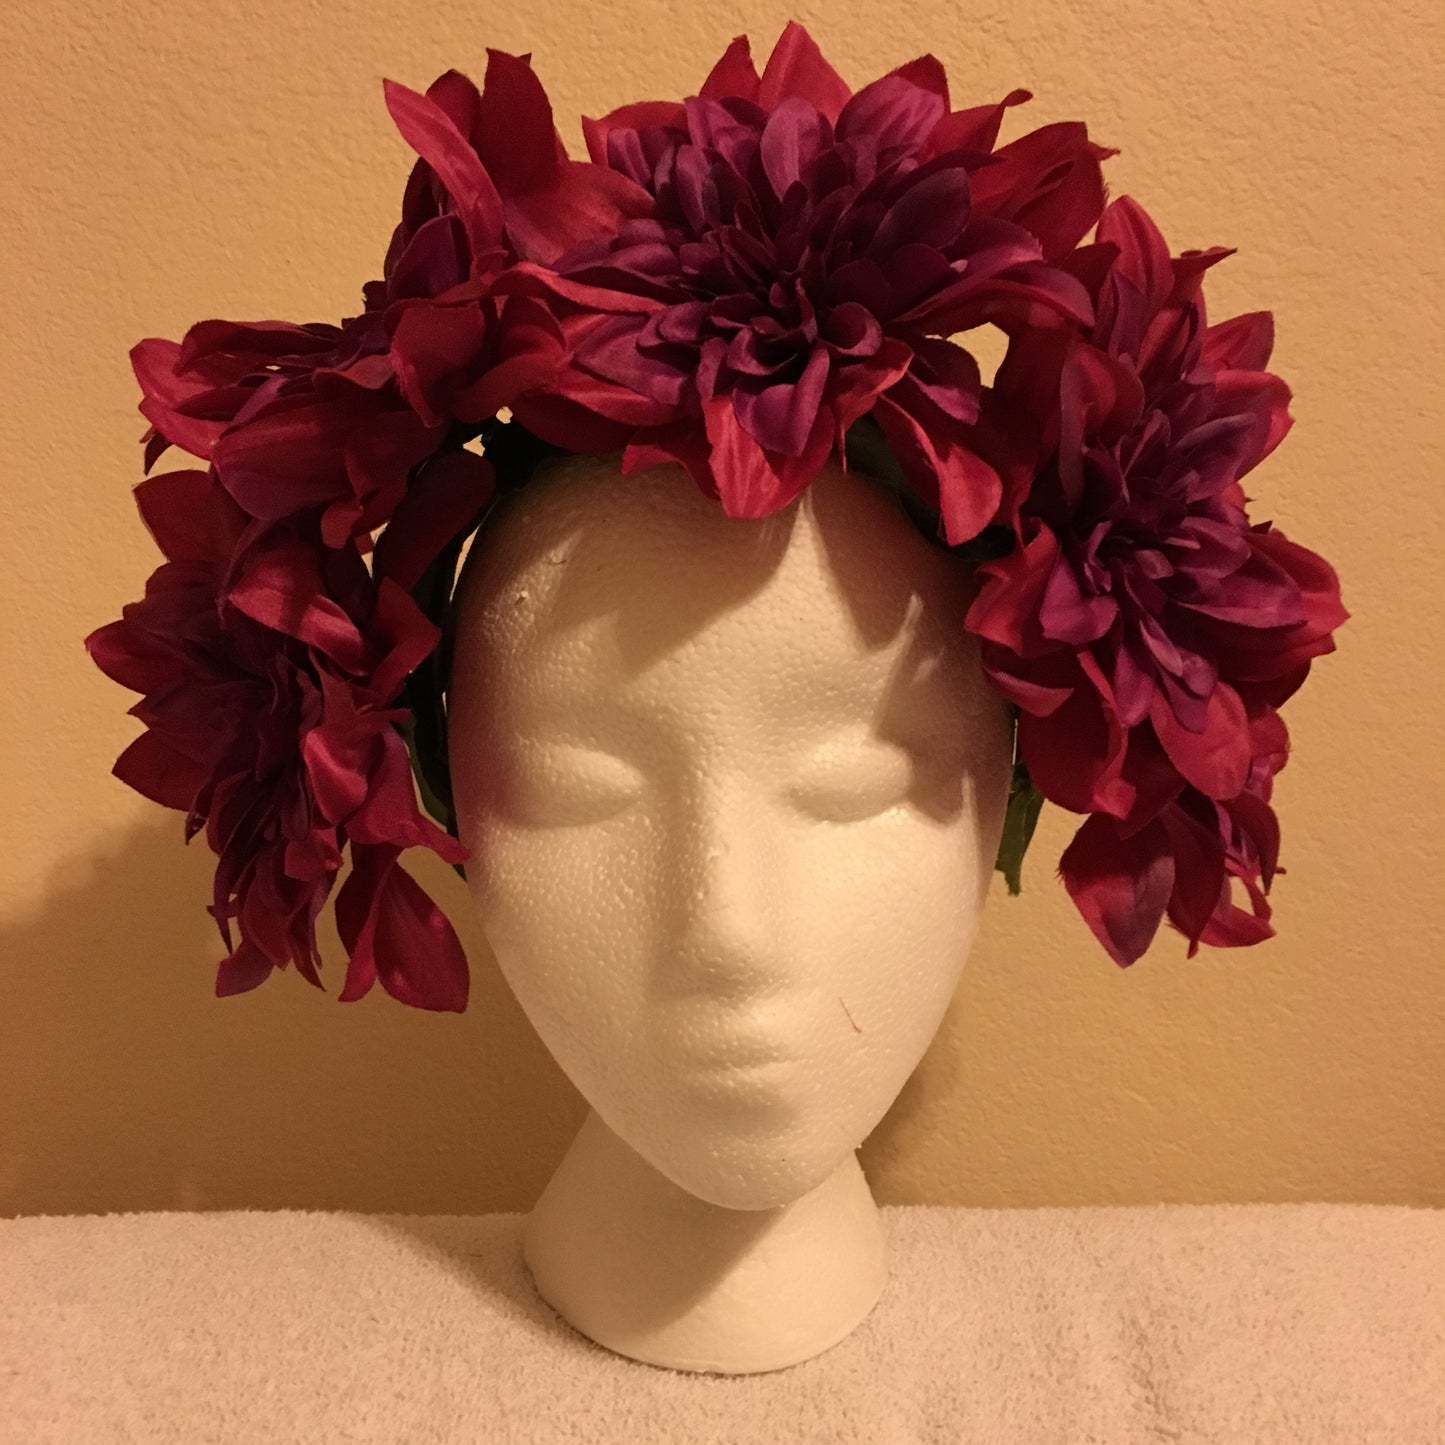 Extra Large Wreath - Burgundy pointy flowers